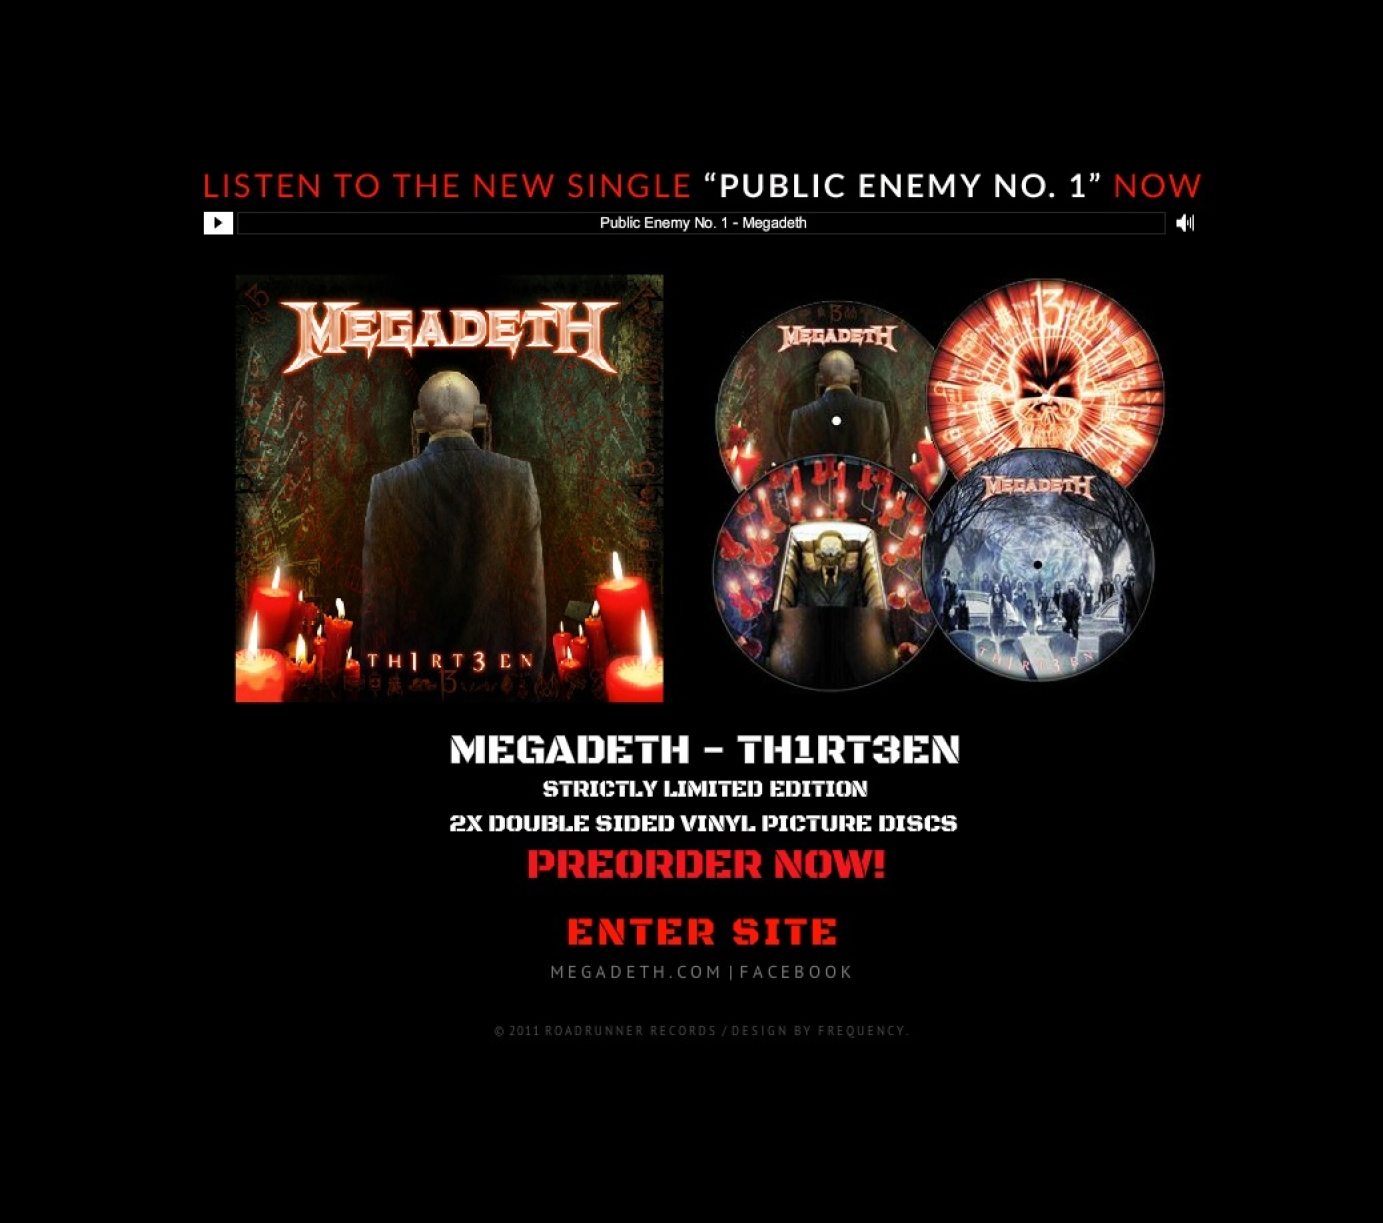 Website for Megadeth by Frequency